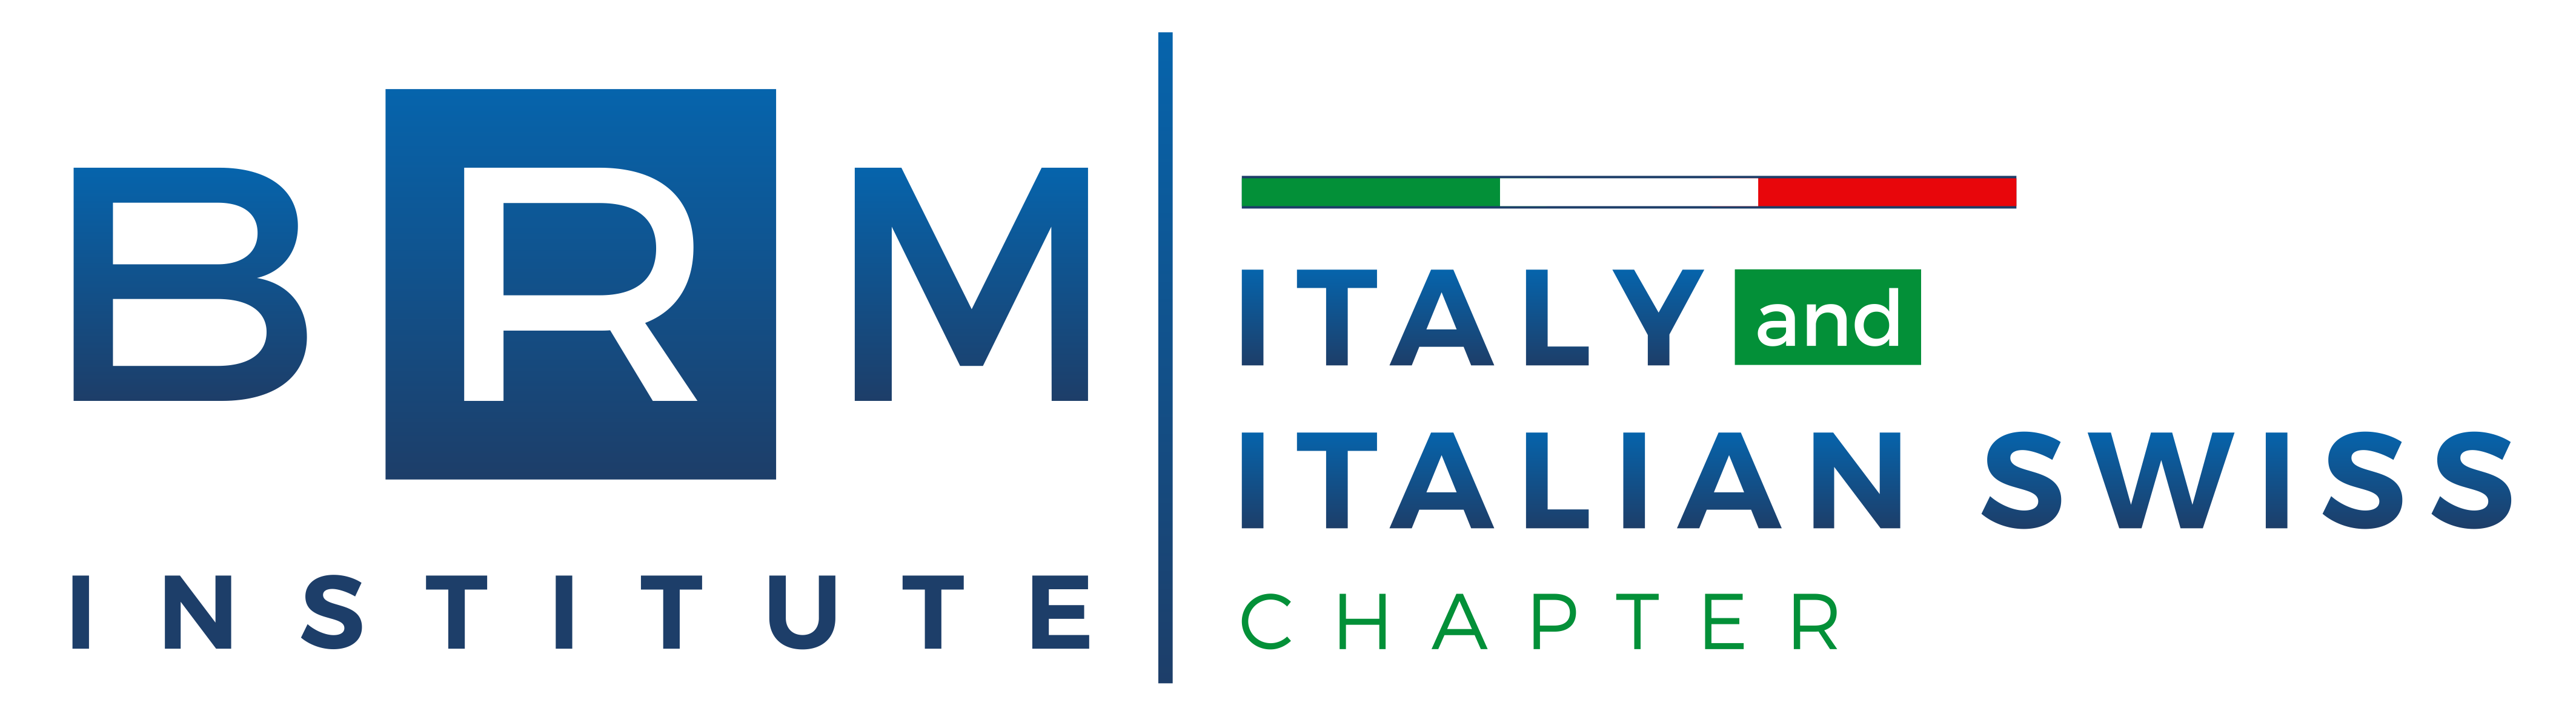 BRM Institute Italy and Italian Swiss Chapter